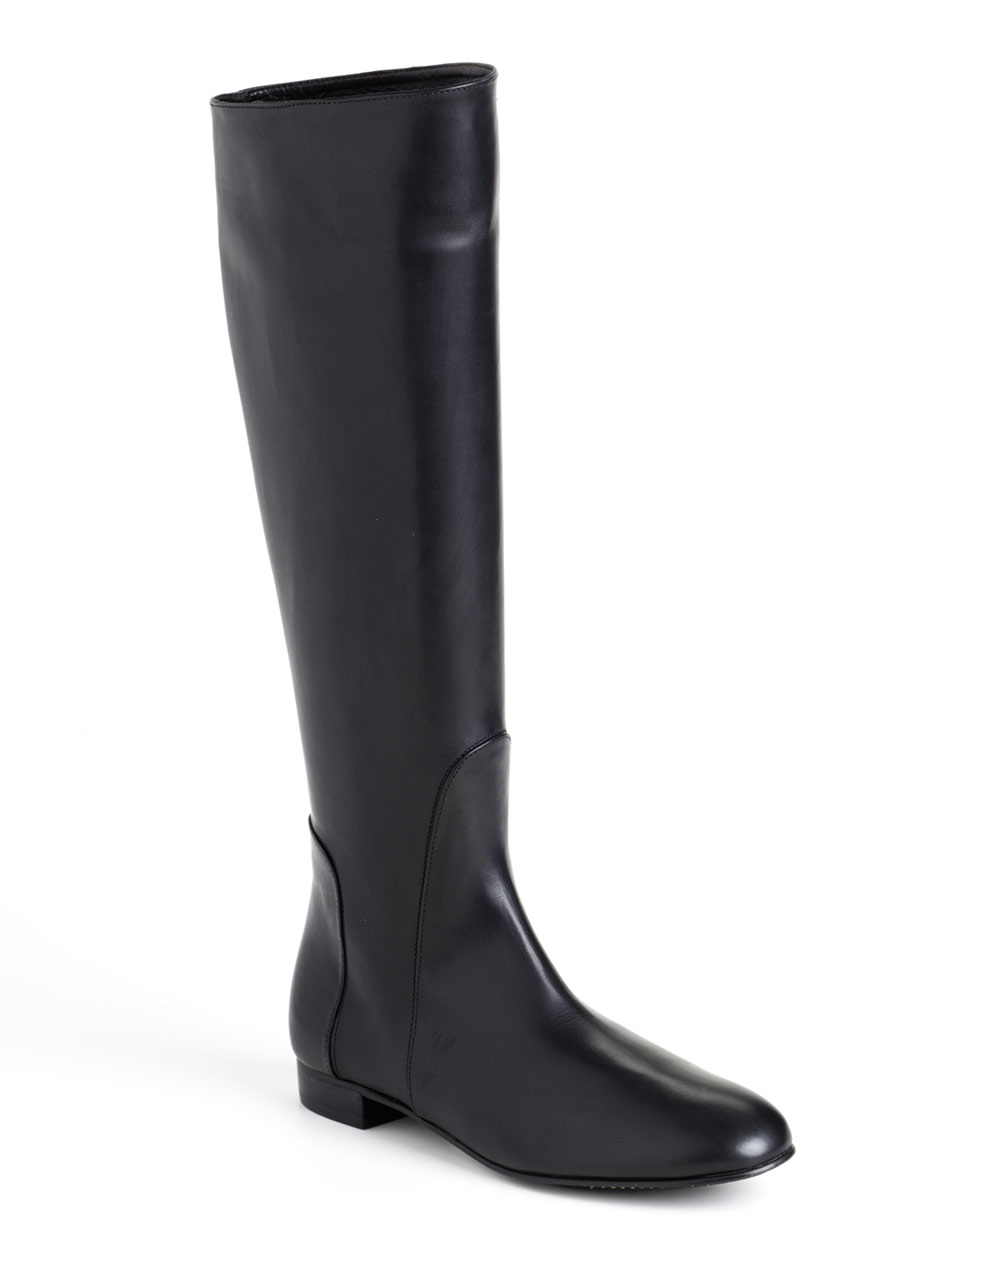 Delman Molly Tall Leather Riding Boots in Black (black leather) | Lyst